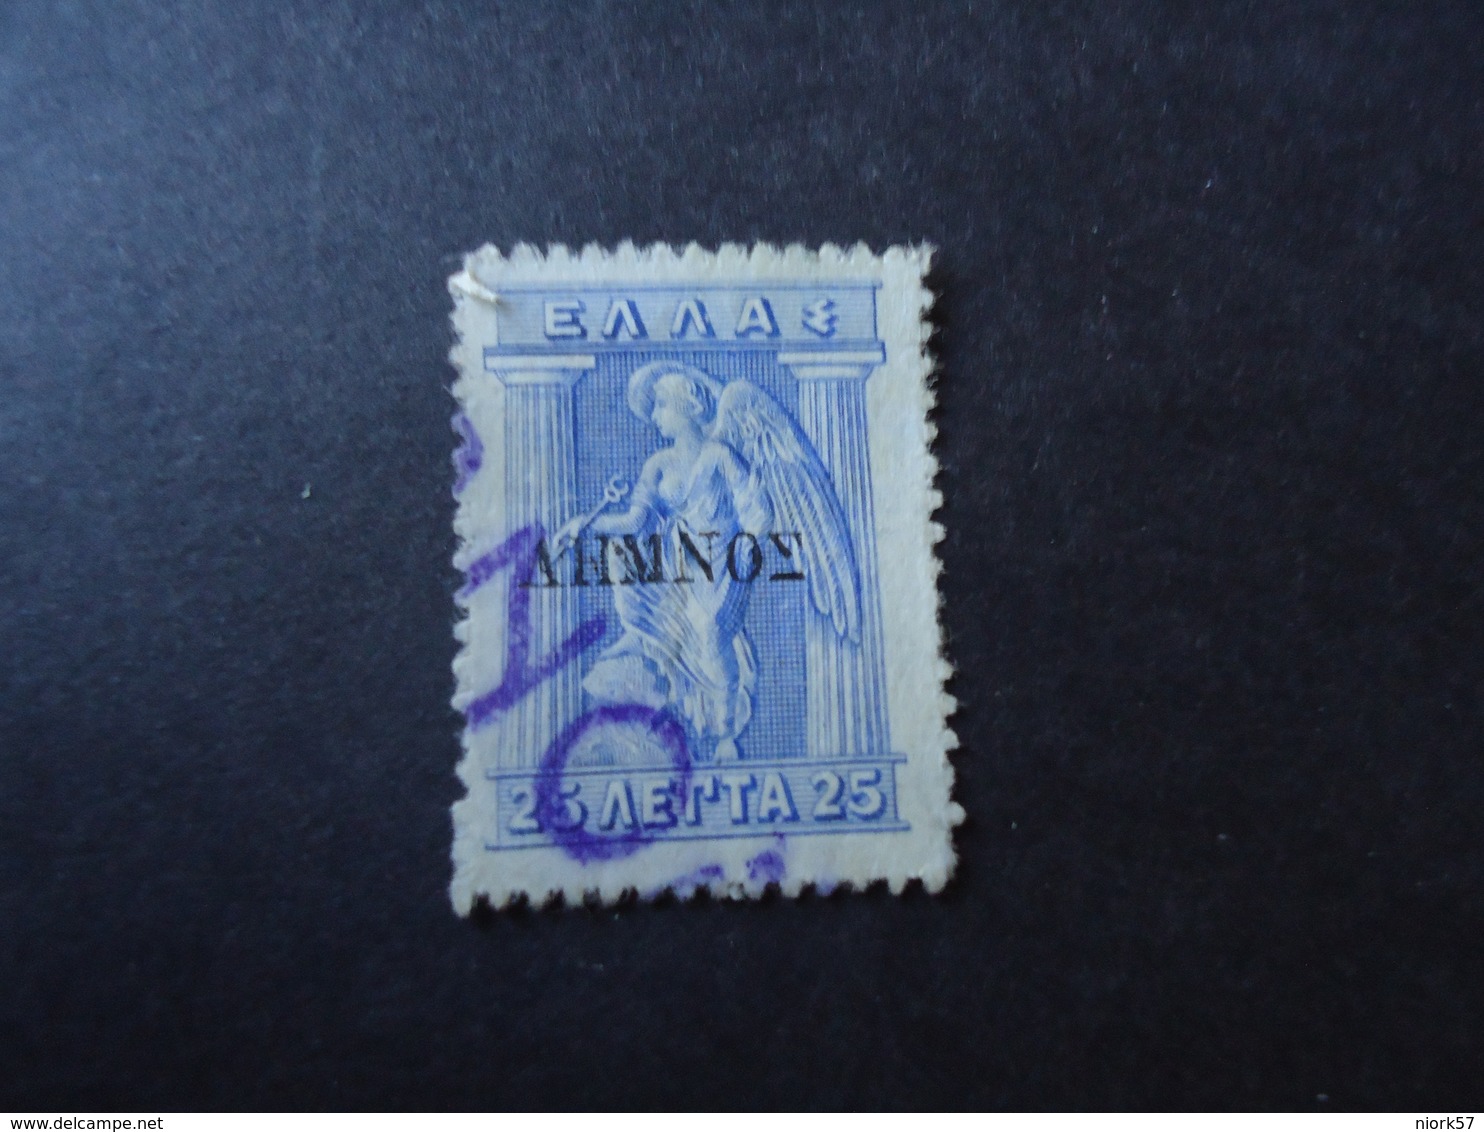 CRETE LEMNOS  GREECE USED STAMPS   WITH POSTMARK  RETHYMNON - Zonder Classificatie